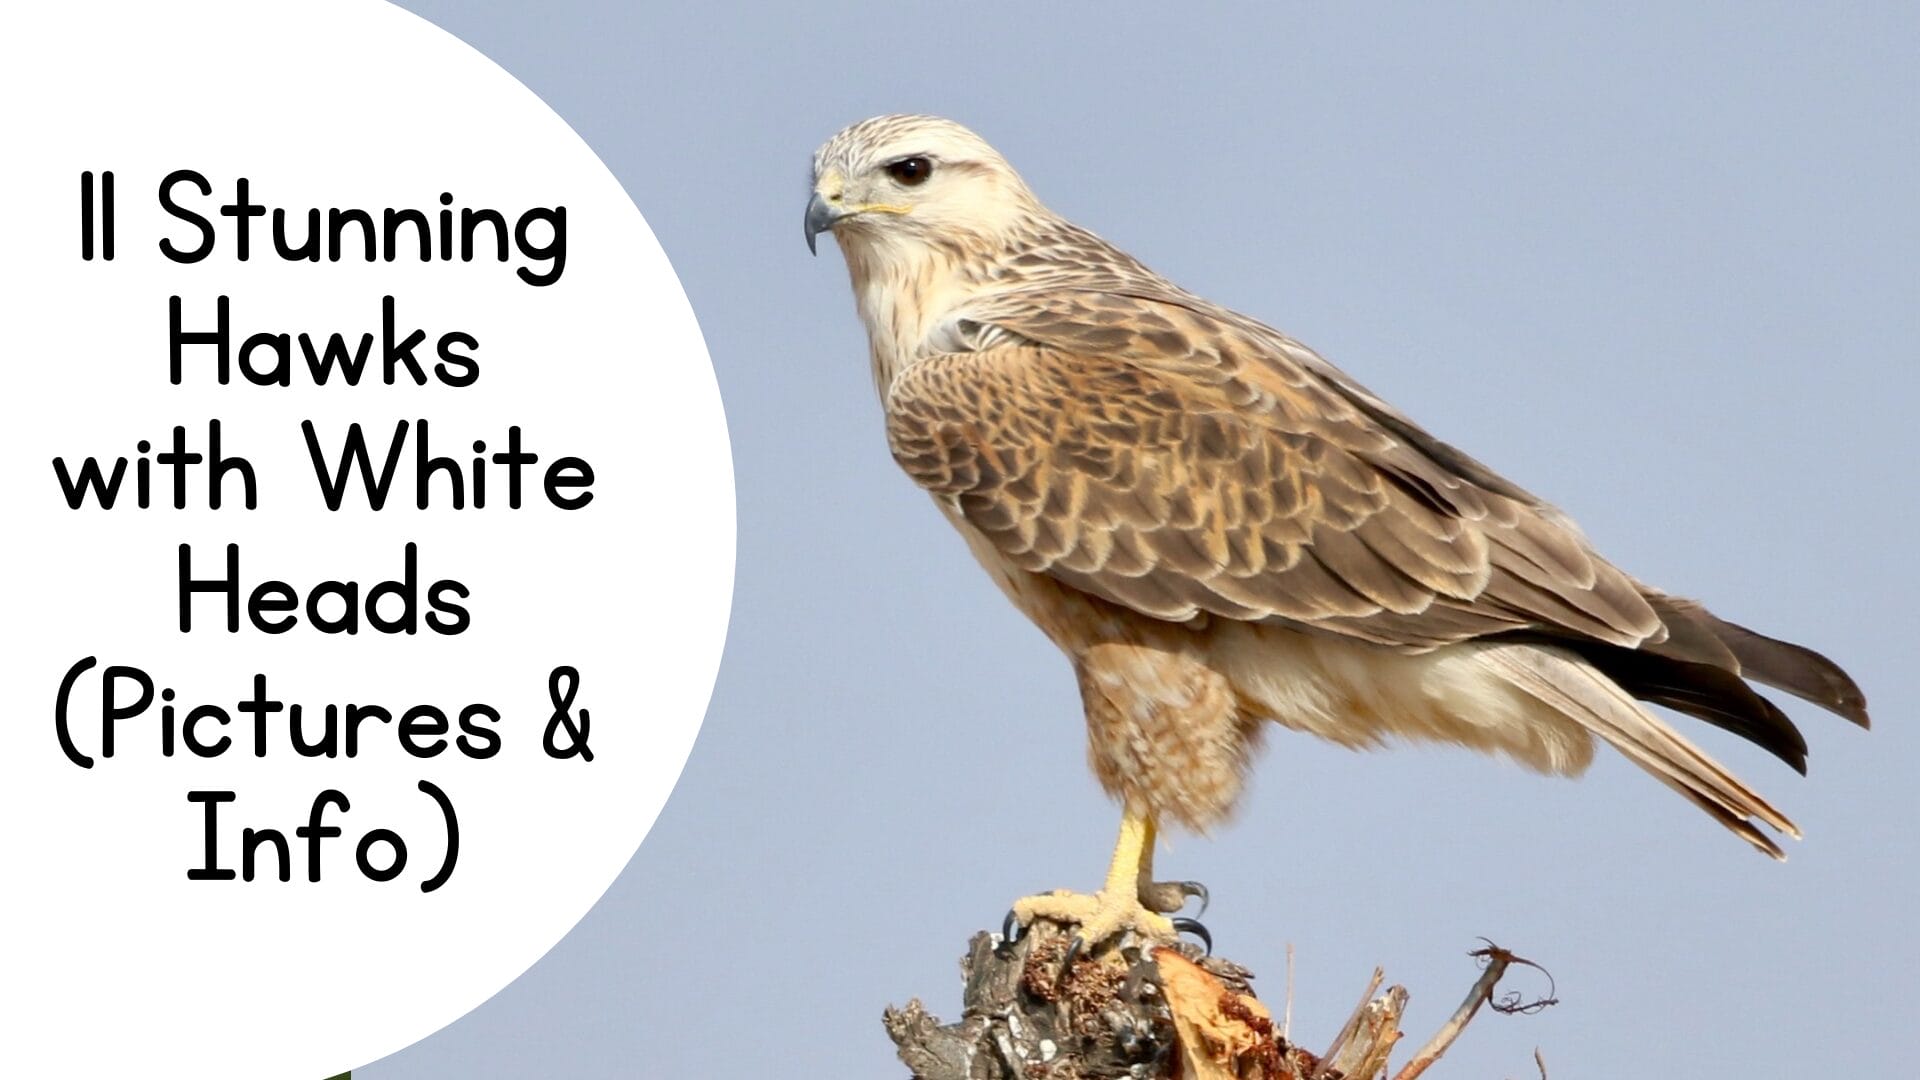 11 Stunning Hawks with White Heads (Pictures & Info)